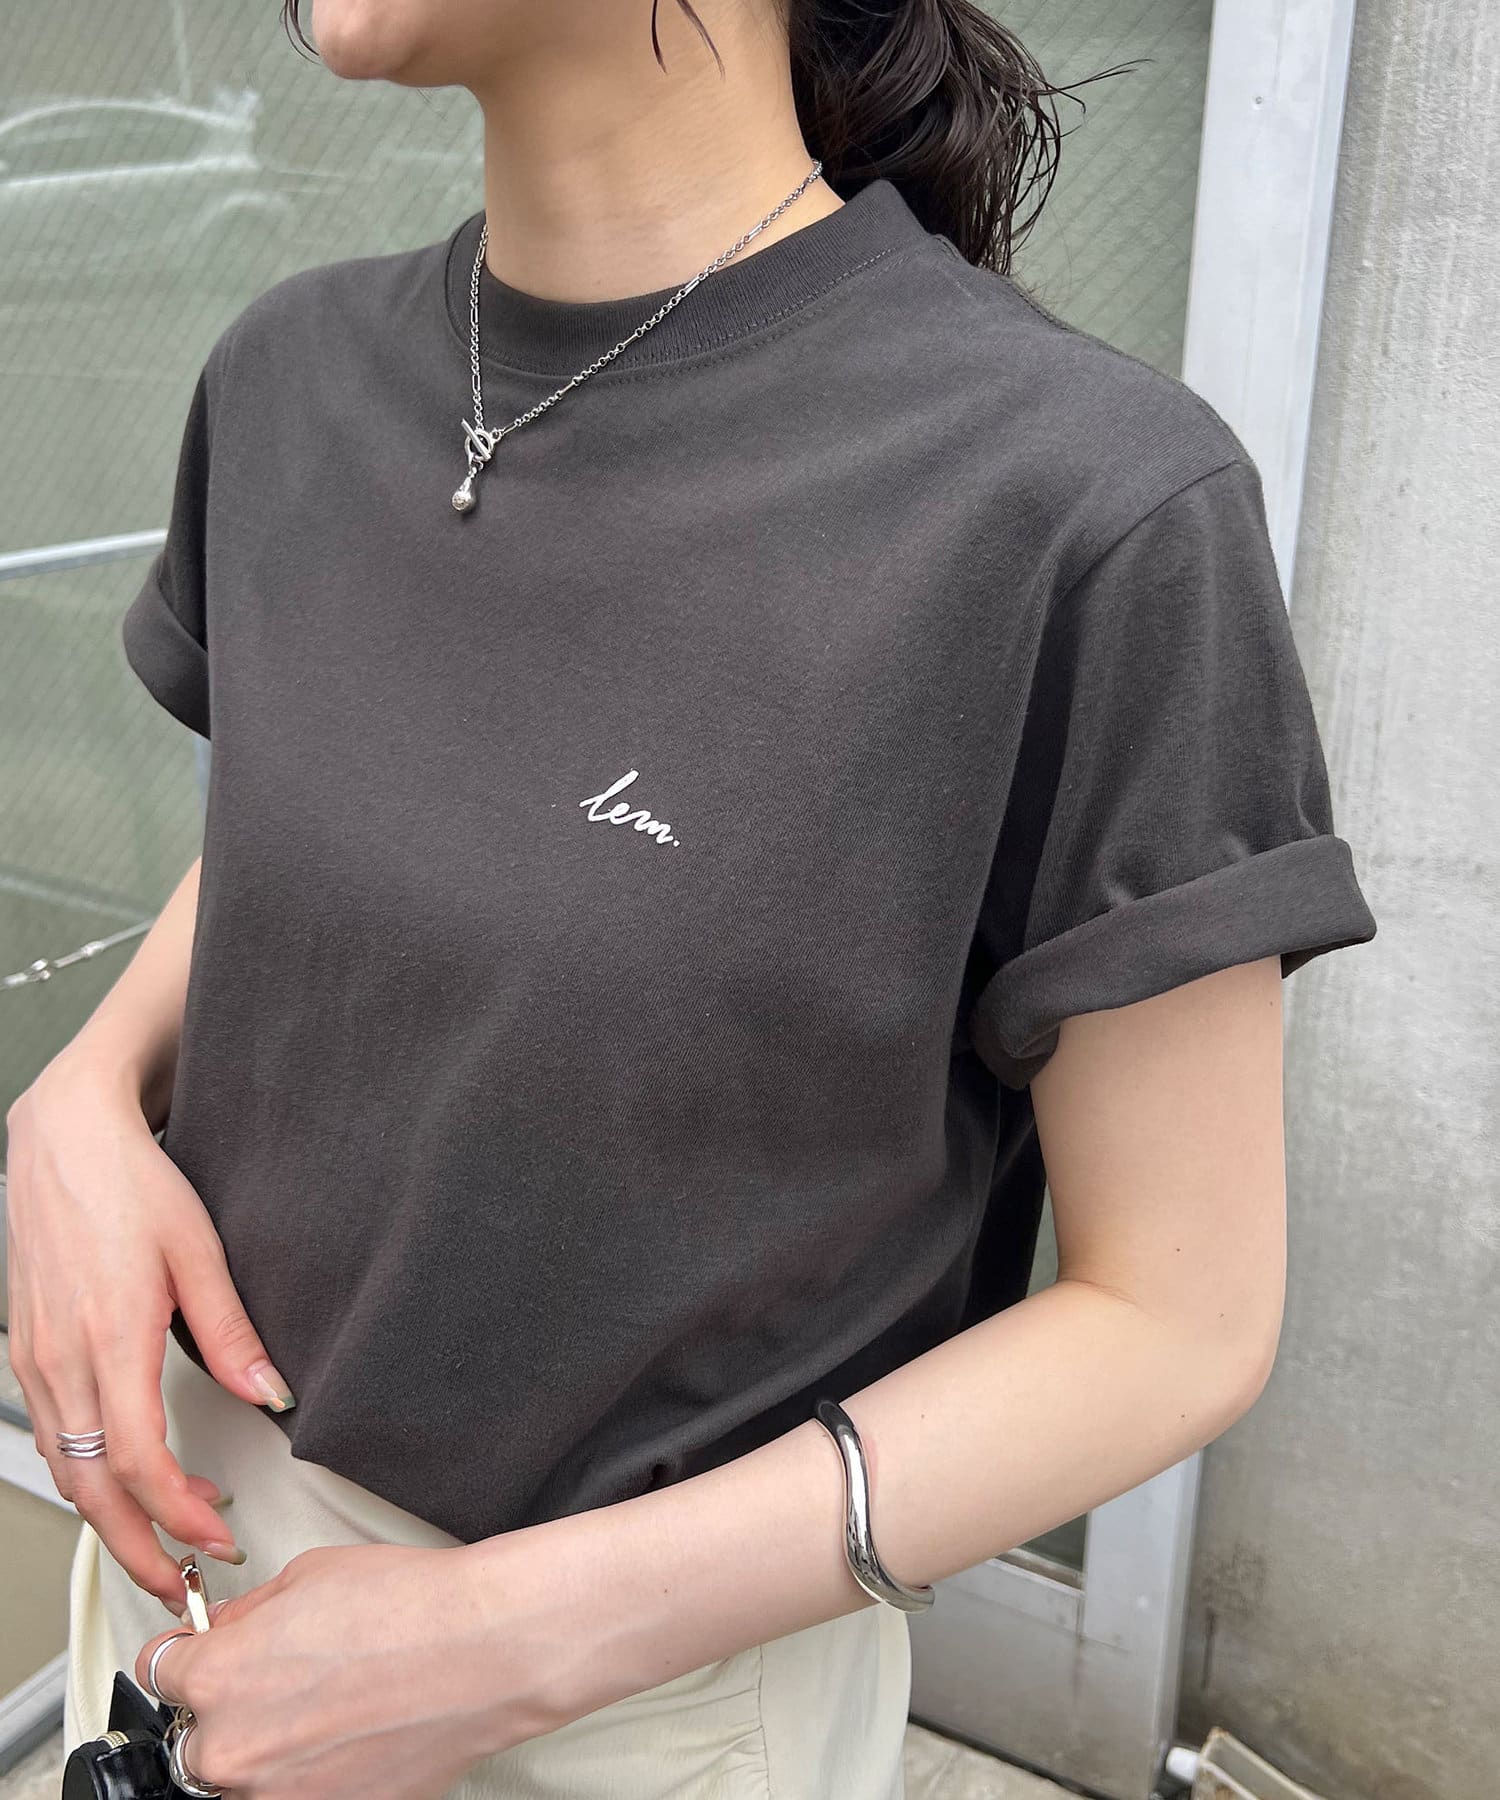 CAPRICIEUX LE'MAGE(カプリシュレマージュ) 1ポイントLEMAGE Tシャツ